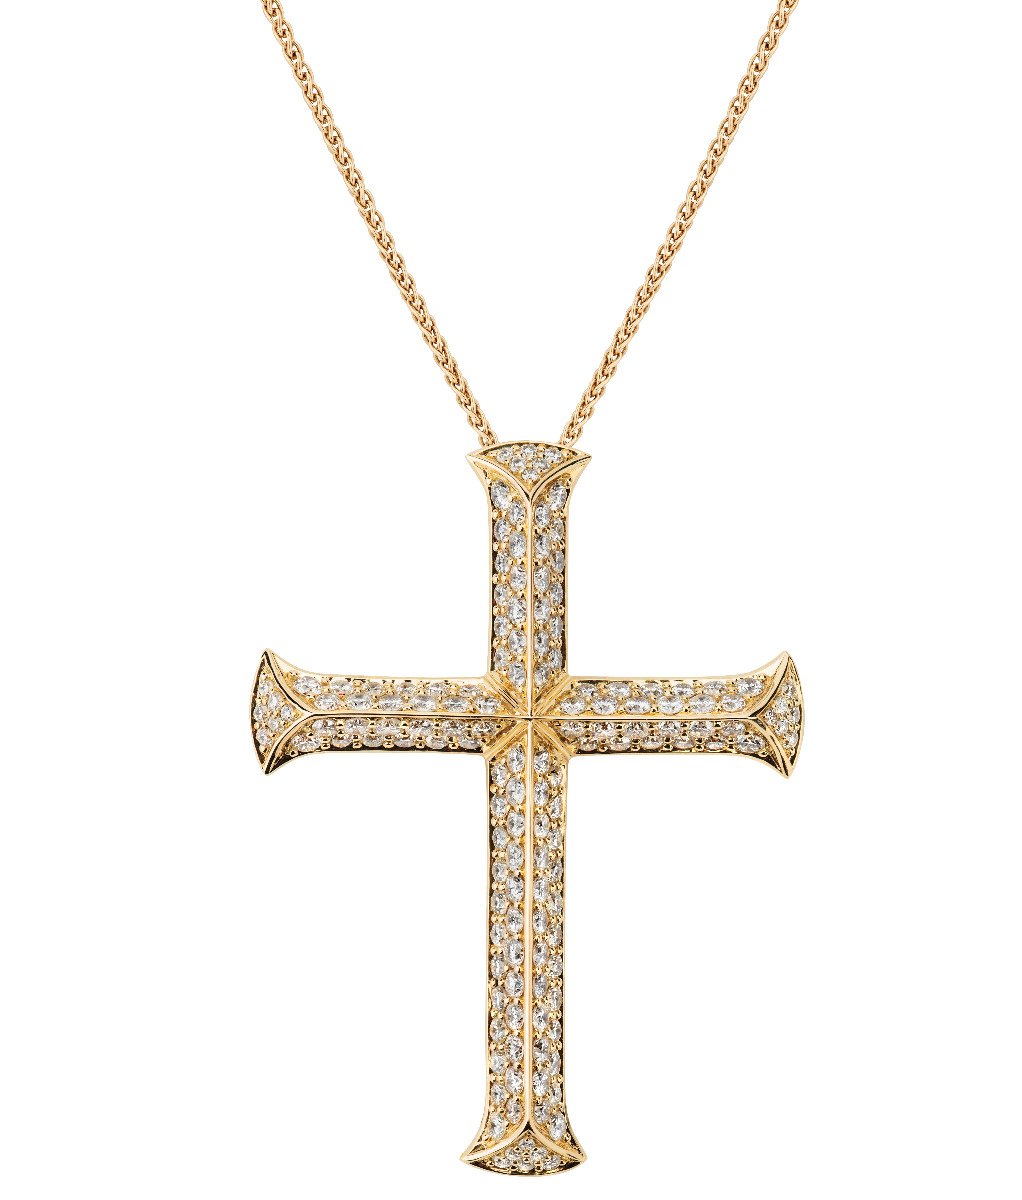 Stephen Webster 18kt Yellow Gold and Diamond Cross Pendant Necklace